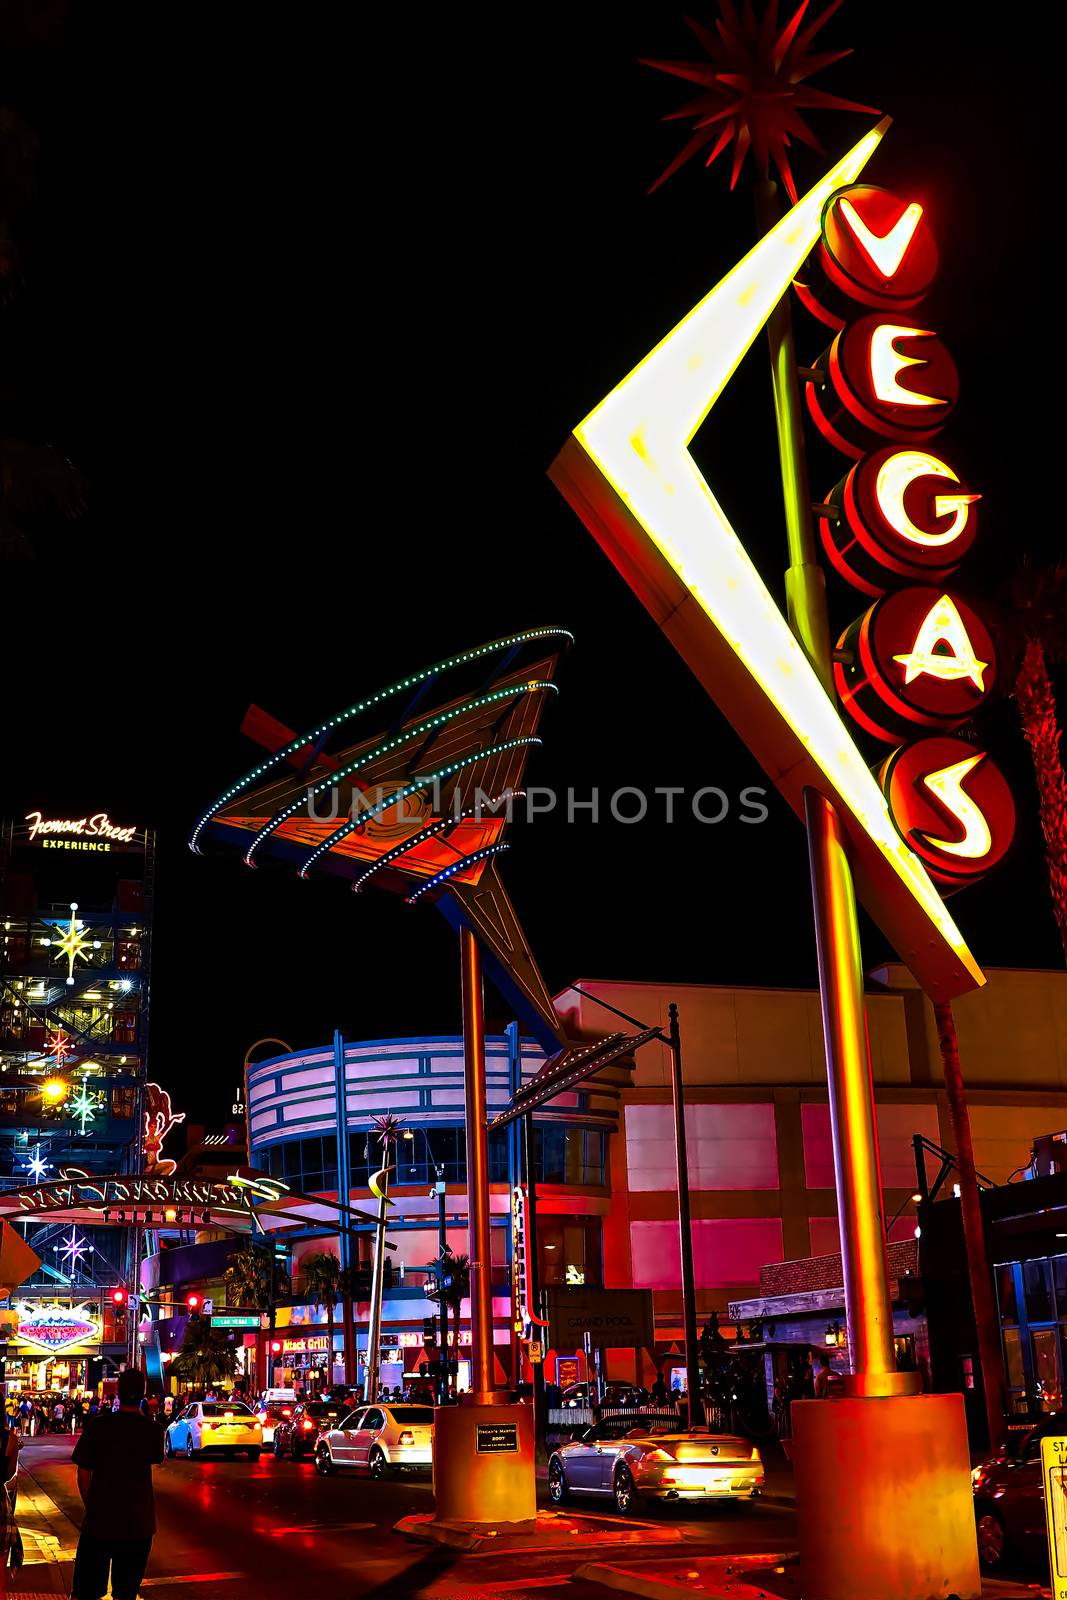 Las Vegas,NV/USA - Oct 09,2016 : "Oscar's Neon Martini Glass"  and Vegas giant neon sign on display above the street near Fremont Street Experience in Las Vegas.The Fremont Street Experience is a pedestrian mall and attraction in downtown Las Vegas. by USA-TARO